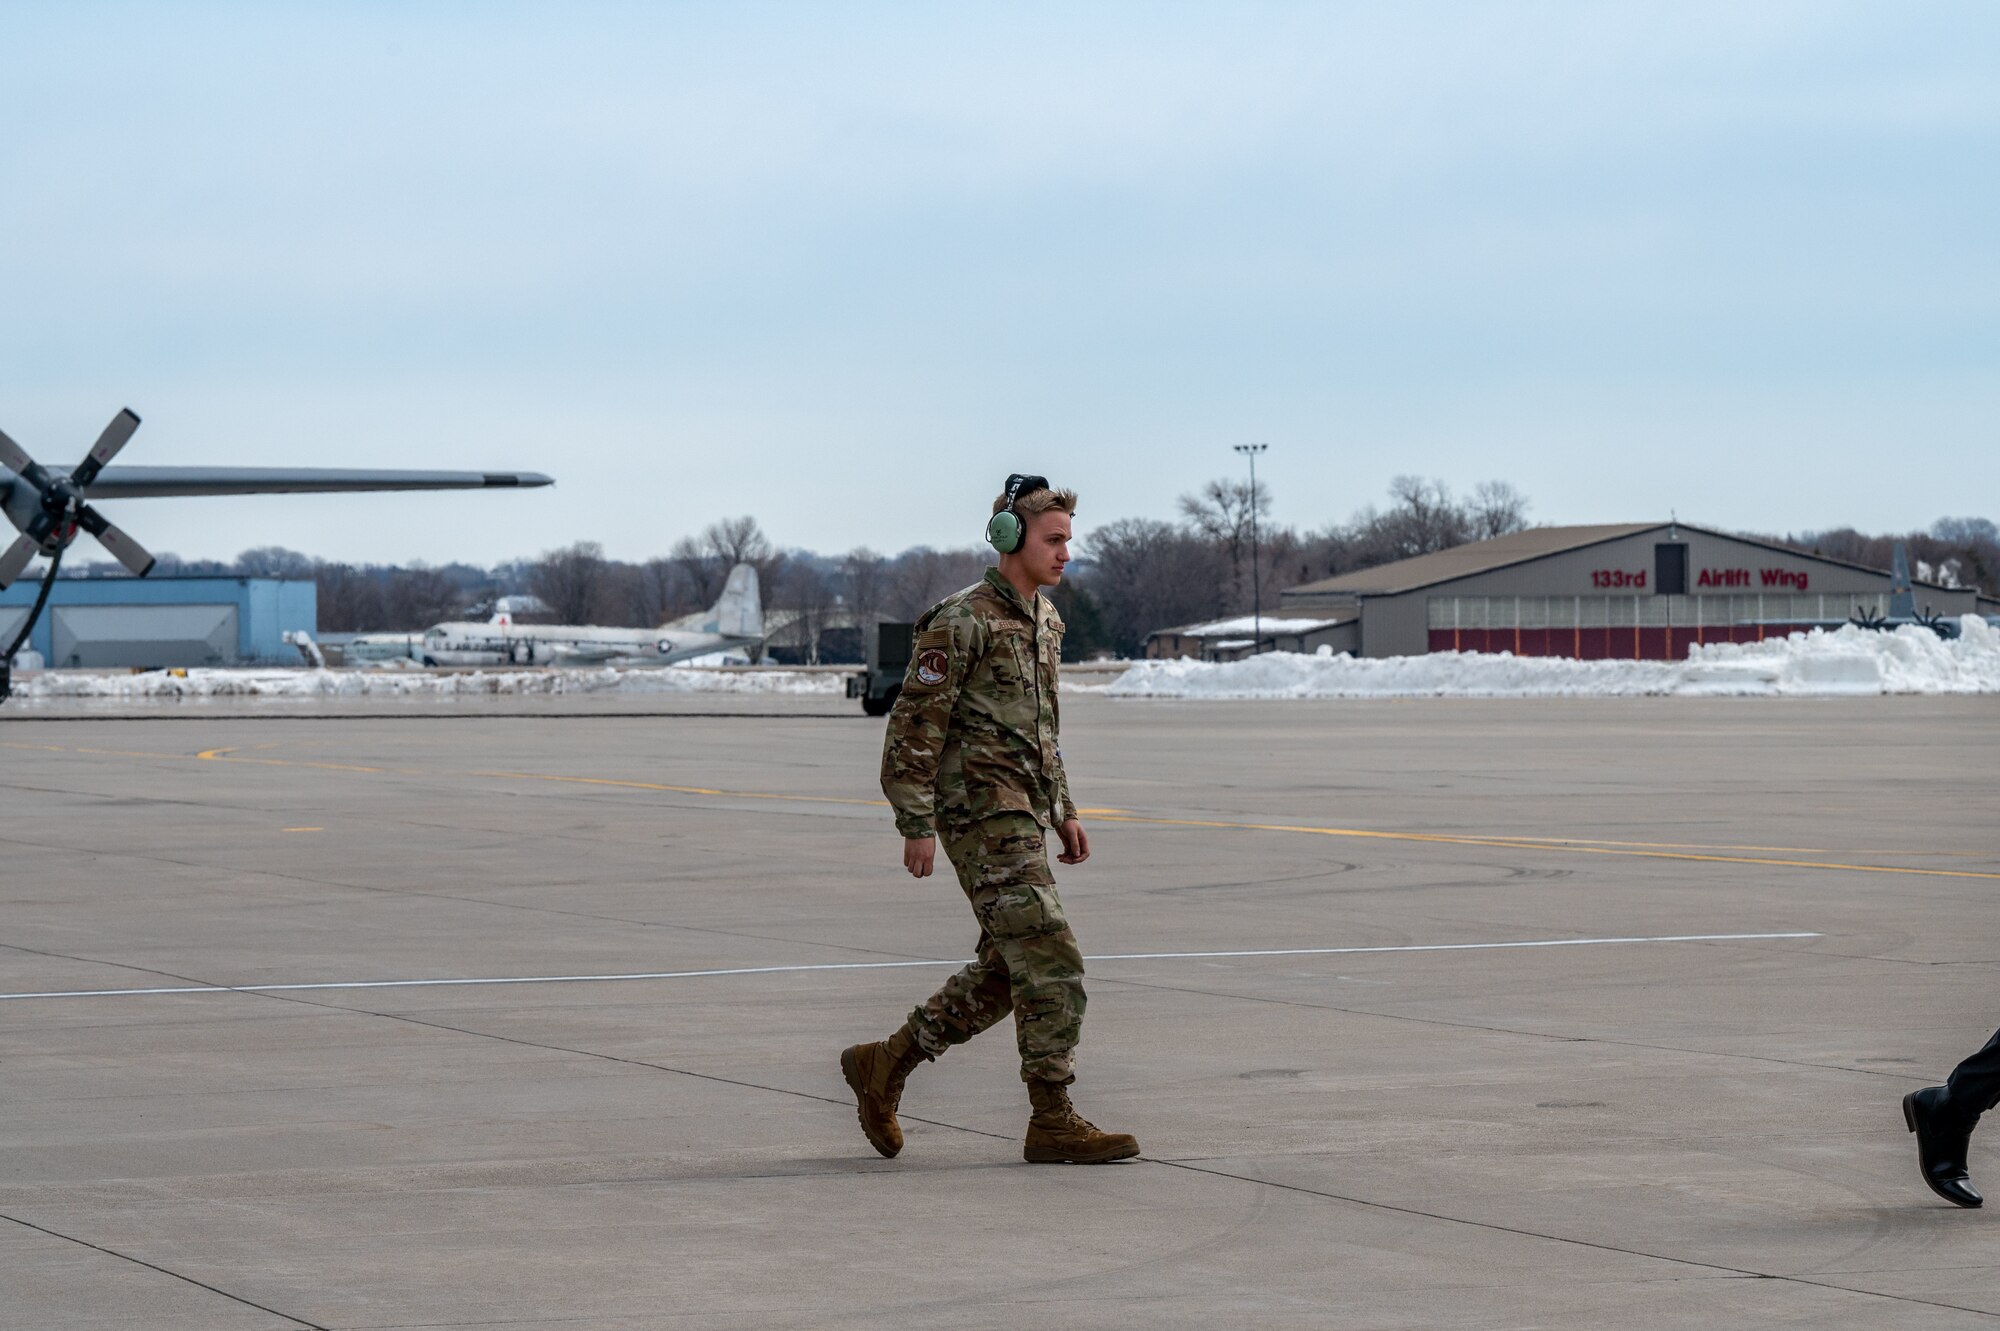 Airman 1st Class Jaxon Jeffries, 934th Aircraft Maintenance Squadron crew chief, walks on the flight line toward Air Force One, after landing at Minneapolis-St. Paul Air Reserve Station, April 3, 2023. (U.S. Air Force photo by Master Sgt. Trevor Saylor)